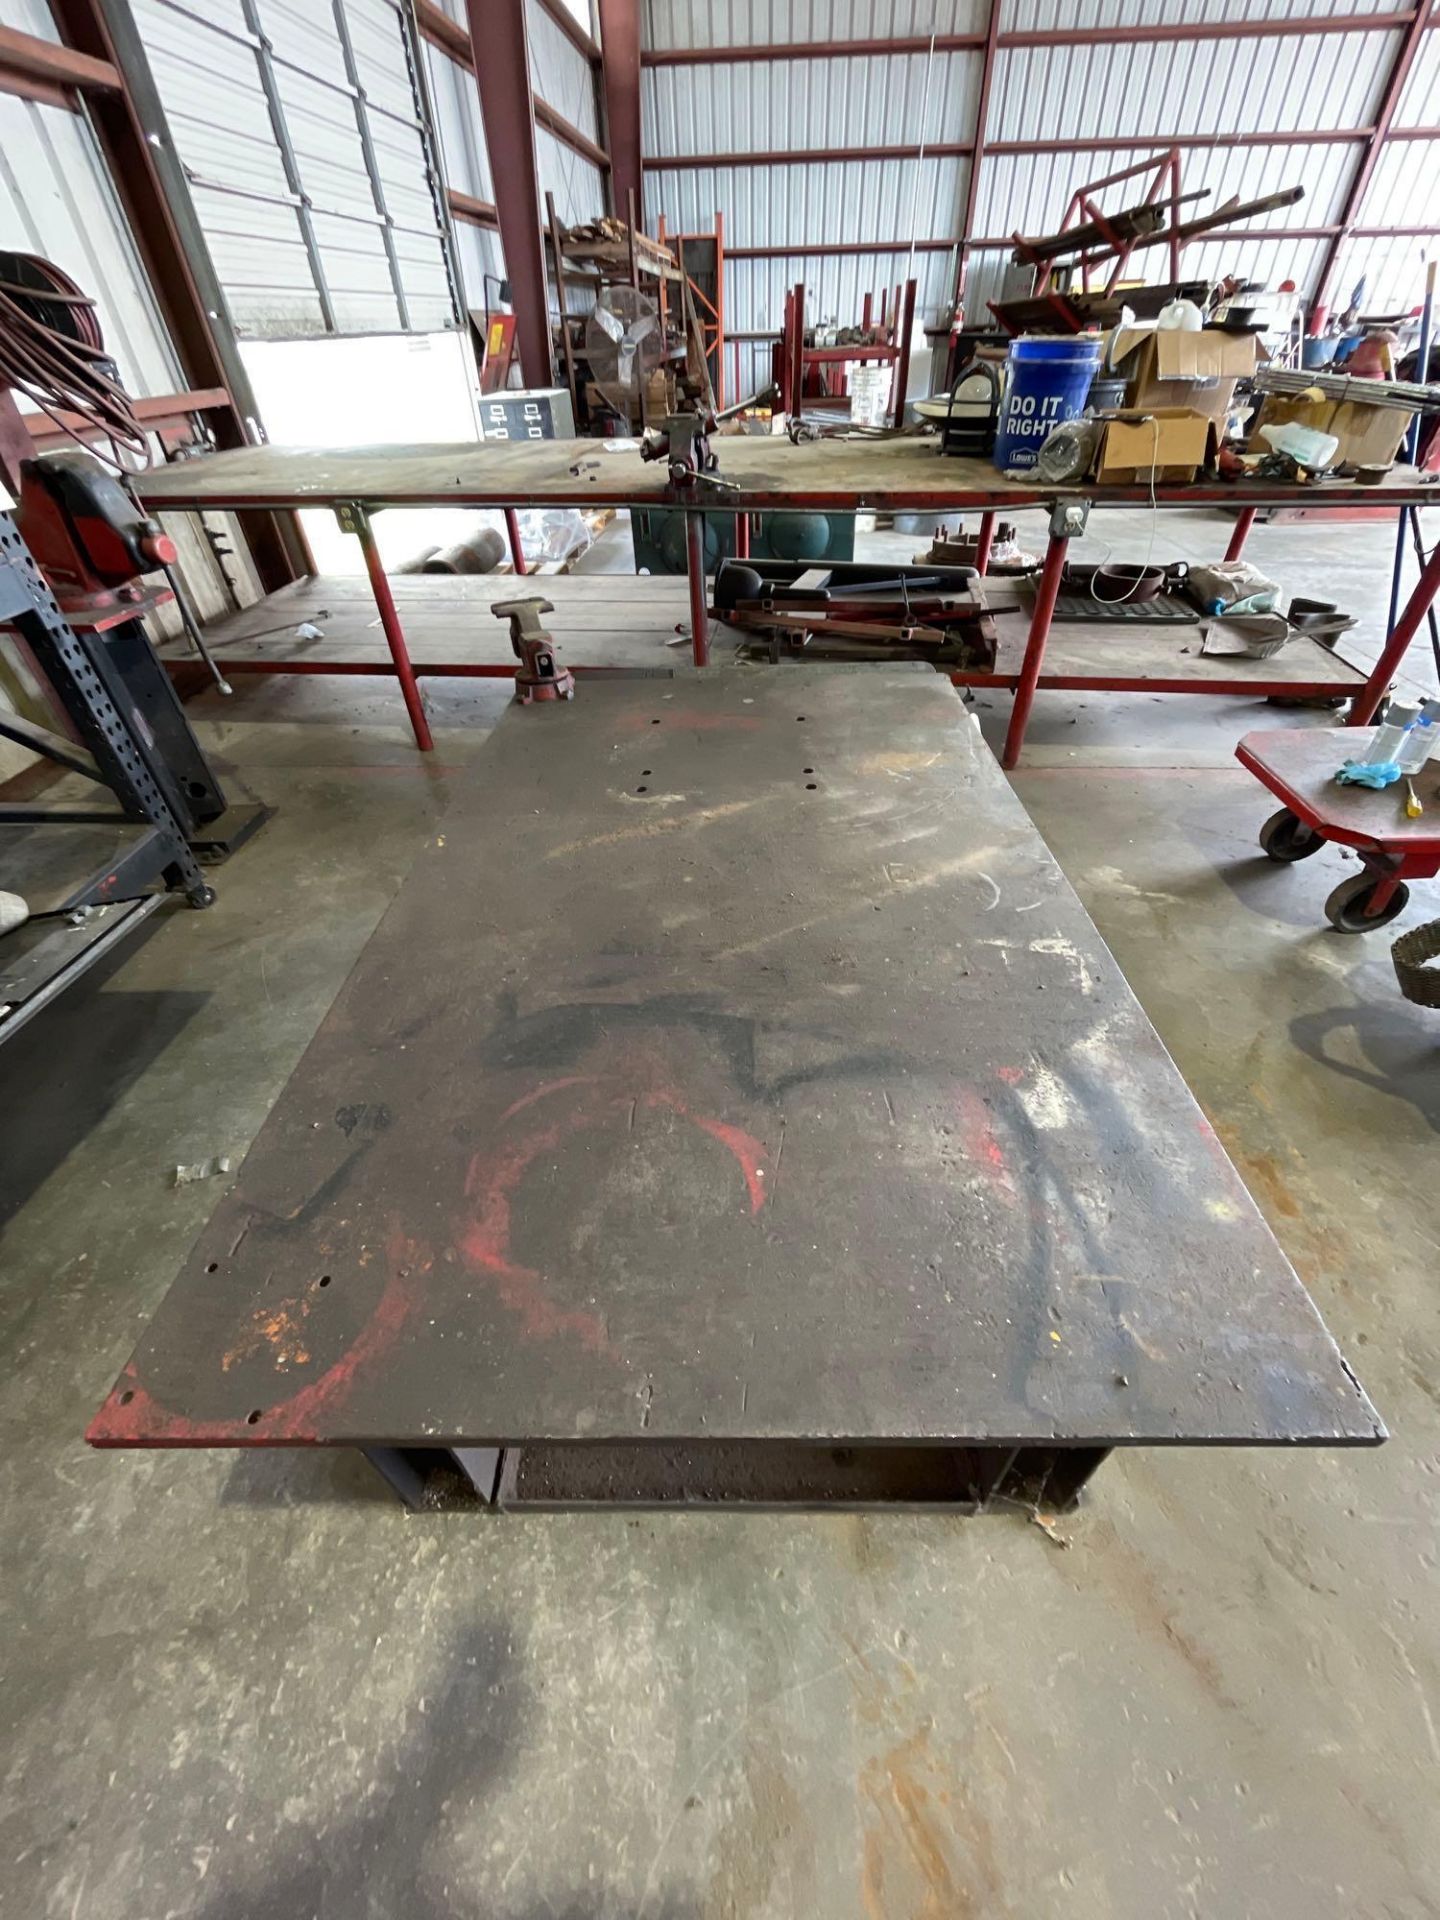 79" X 48" X 24" H.D. Welding Table with 6" Vise - Image 3 of 7